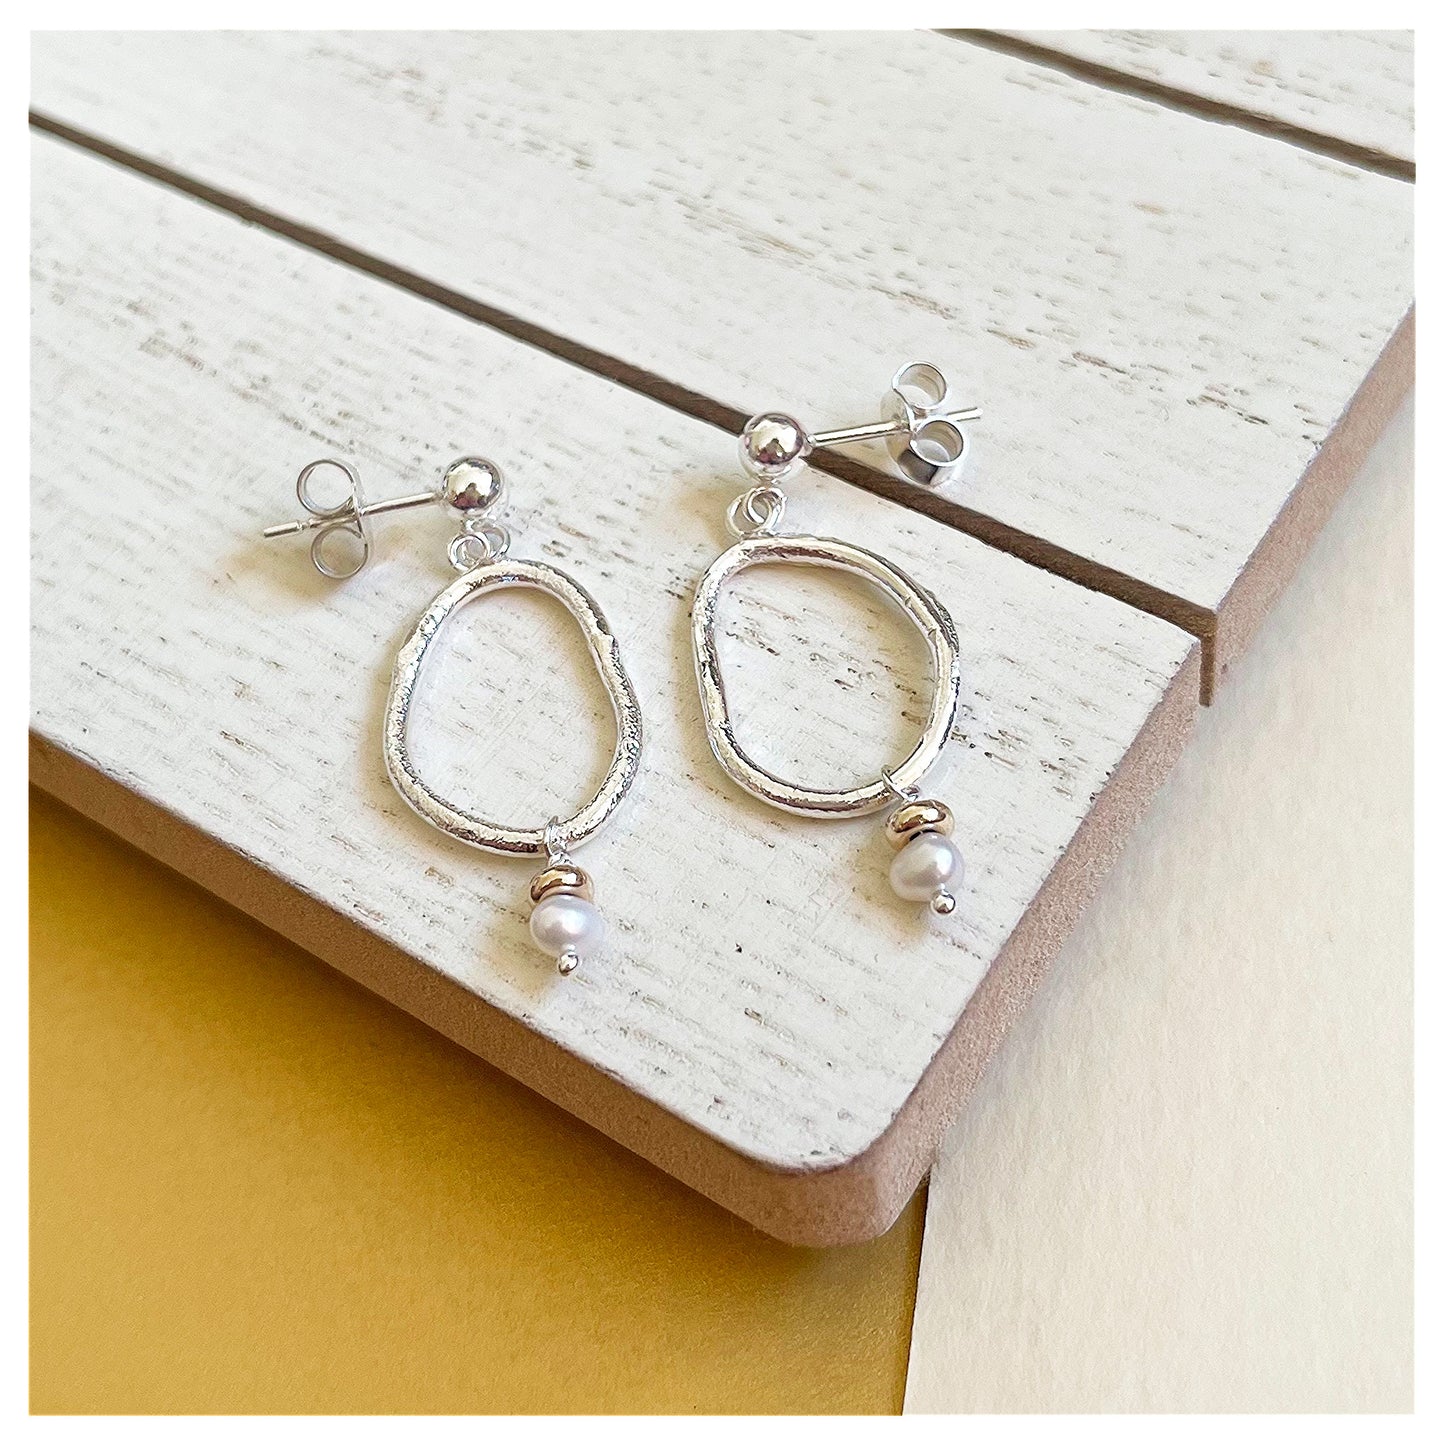 9ct Yellow Gold, Freshwater Pearl and Sterling Silver Organic Pebble Drop Stud Earrings